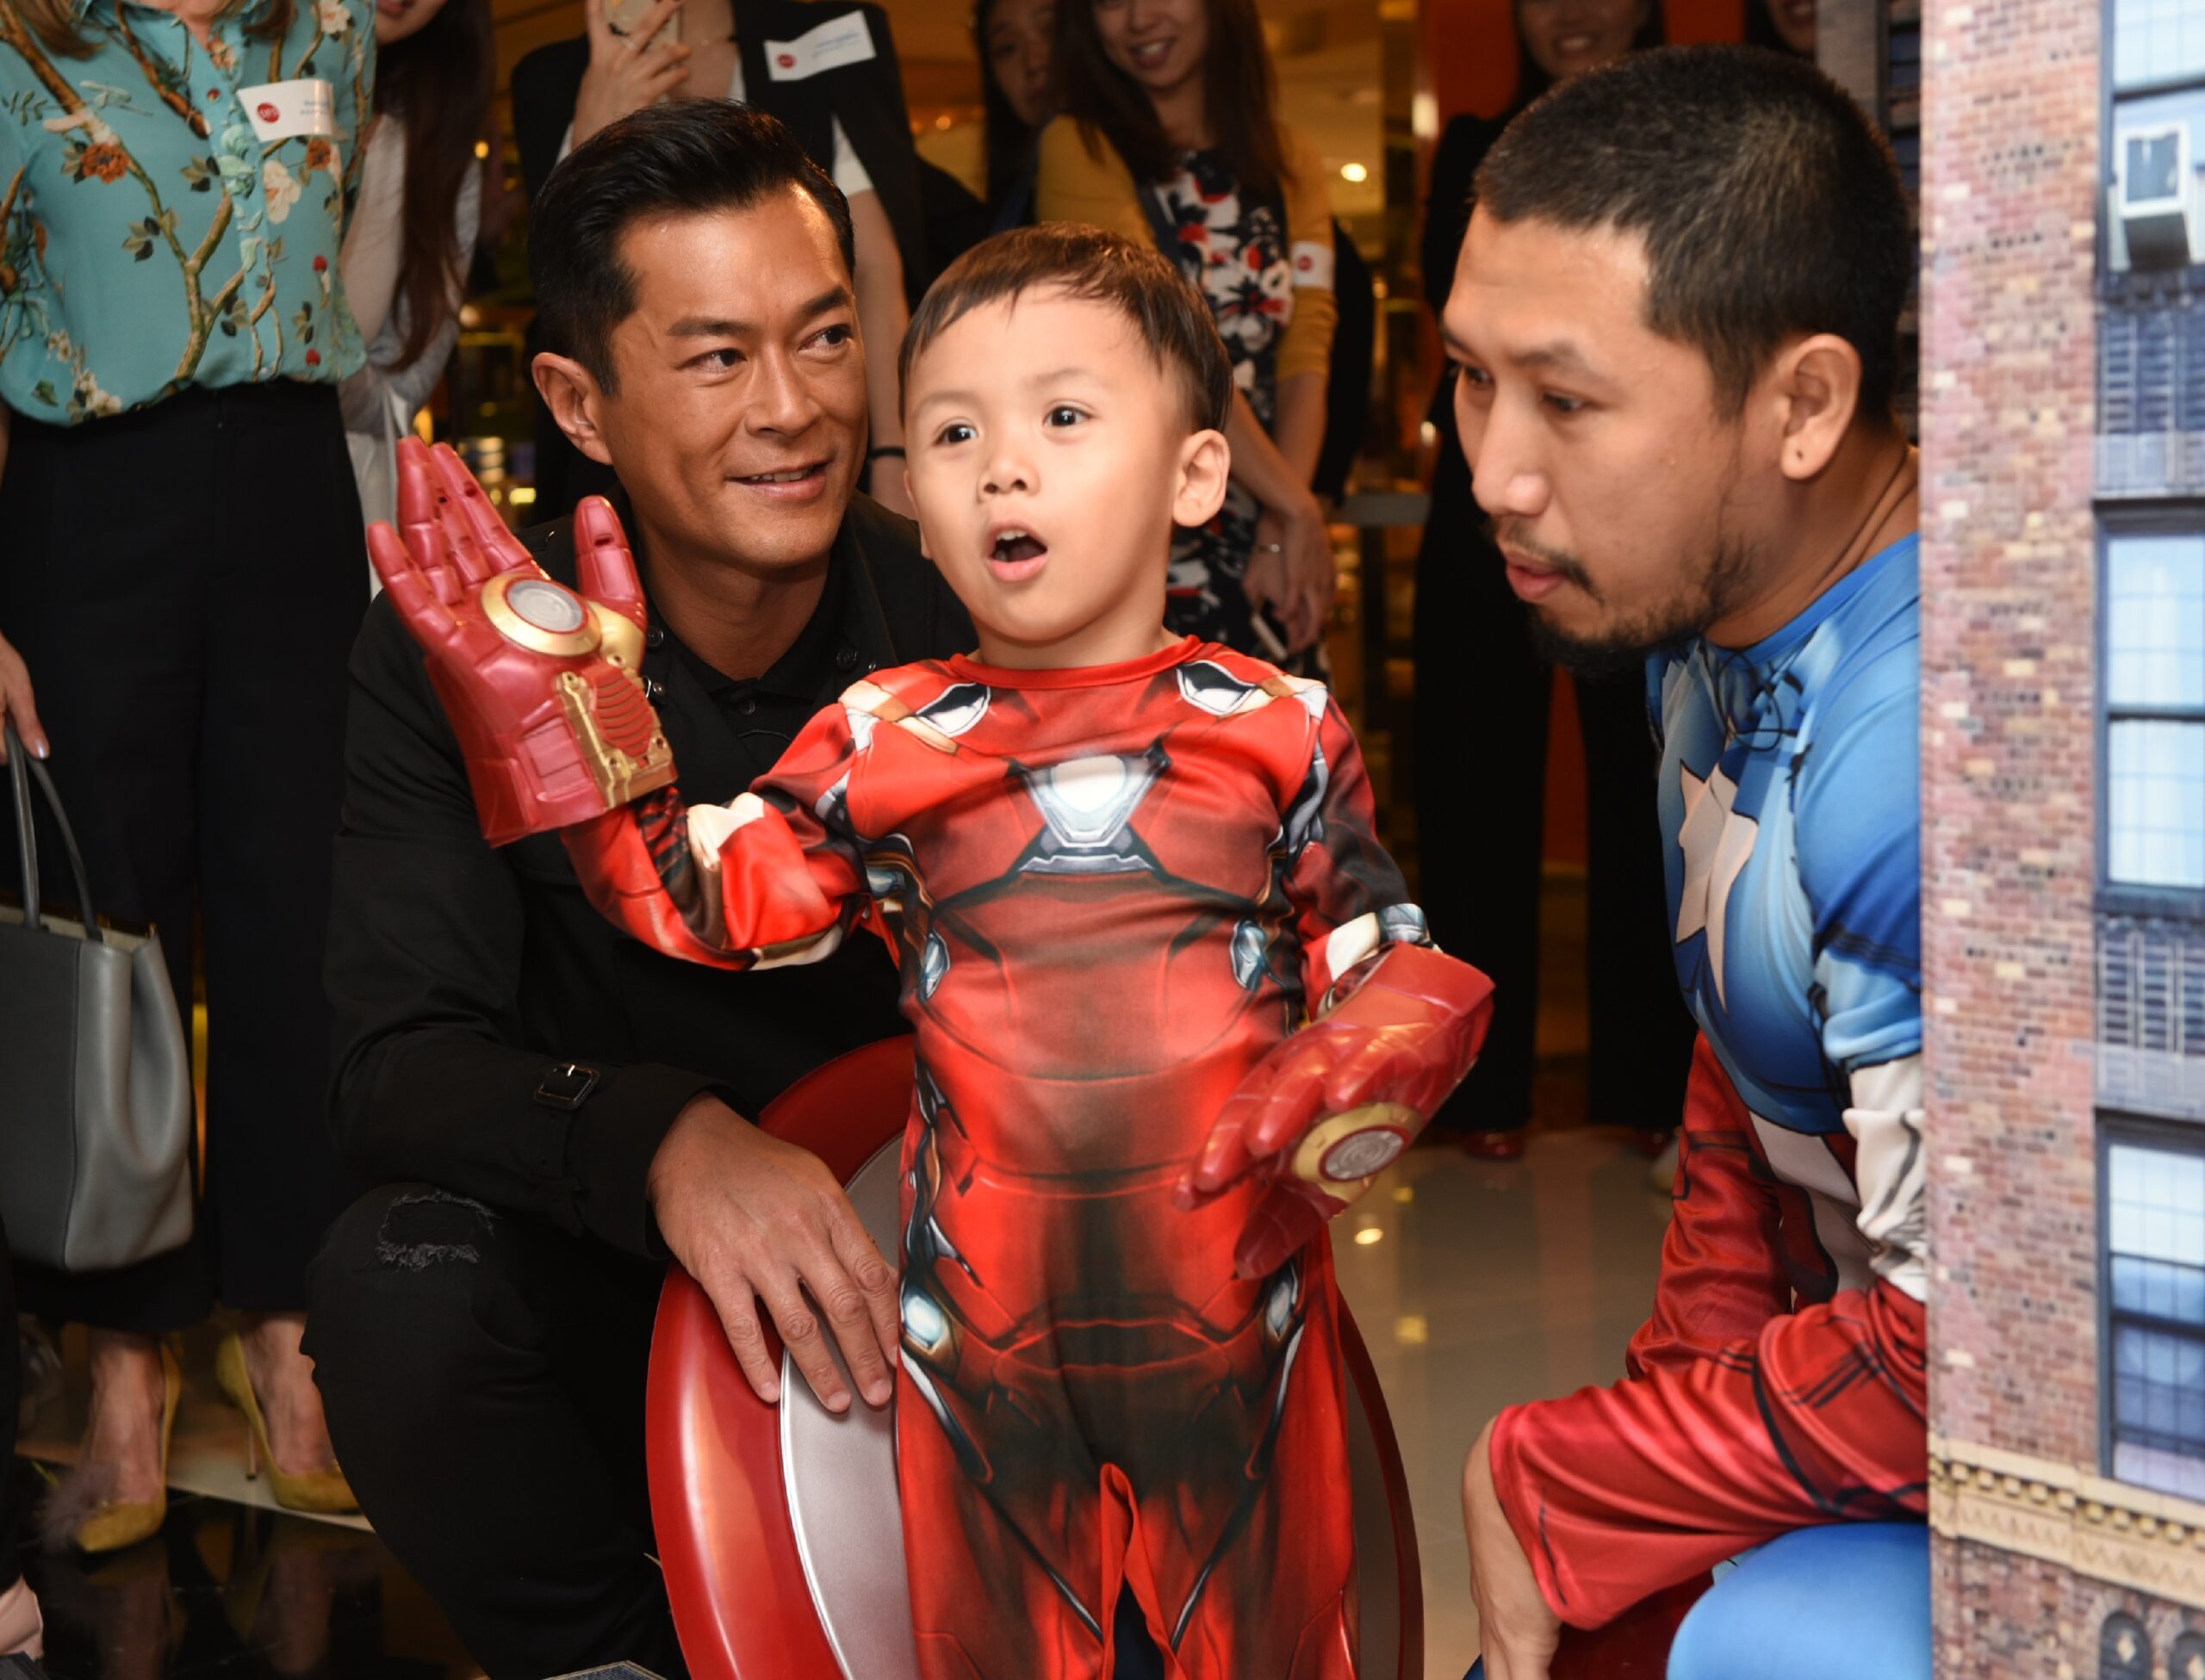 yuet-lun-along-with-hong-kong-actor-louis-koo-l-and-his-father-r-waves-to-the-crowd-of-fans-gathered-to-support-his-wish-of-being-a-superhero